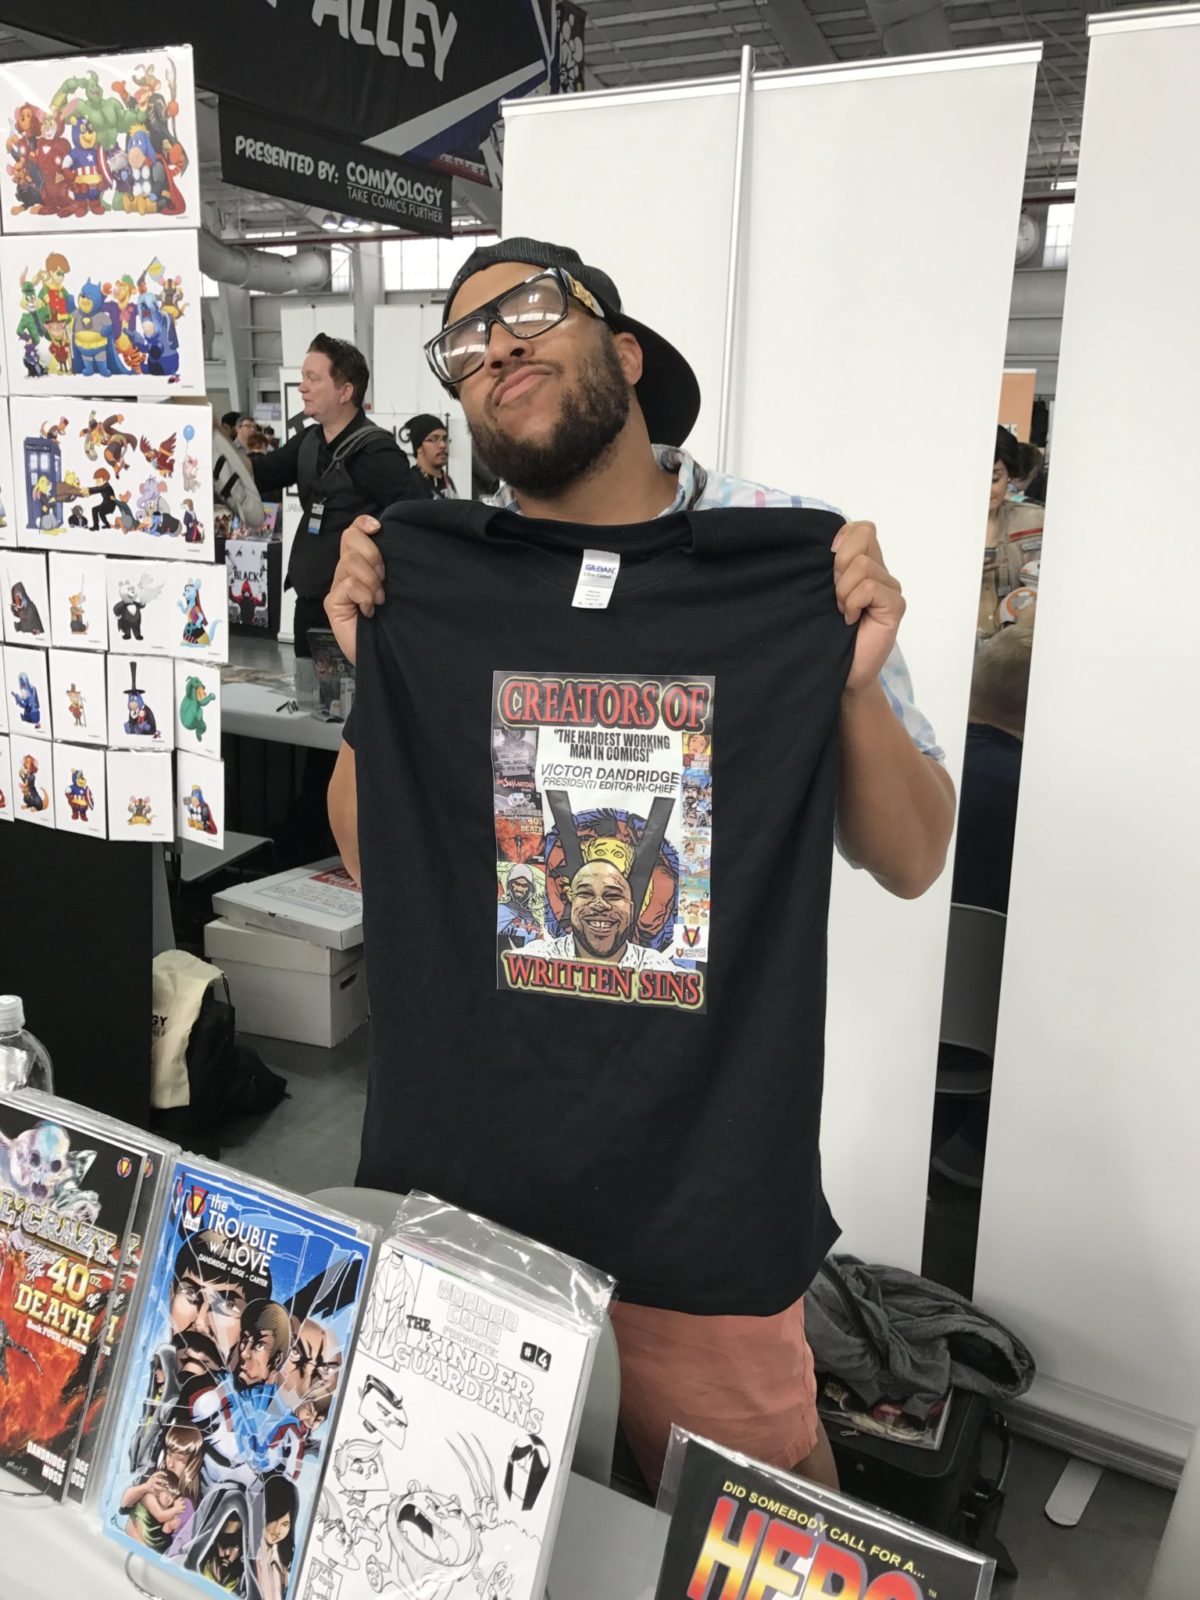 LIVE FROM NYCC VICTOR DANDRIDGE JR IS A King of Cons and he shows it at NYCC  . :: A Throw BacK Thread :: A Throw BacK Thread